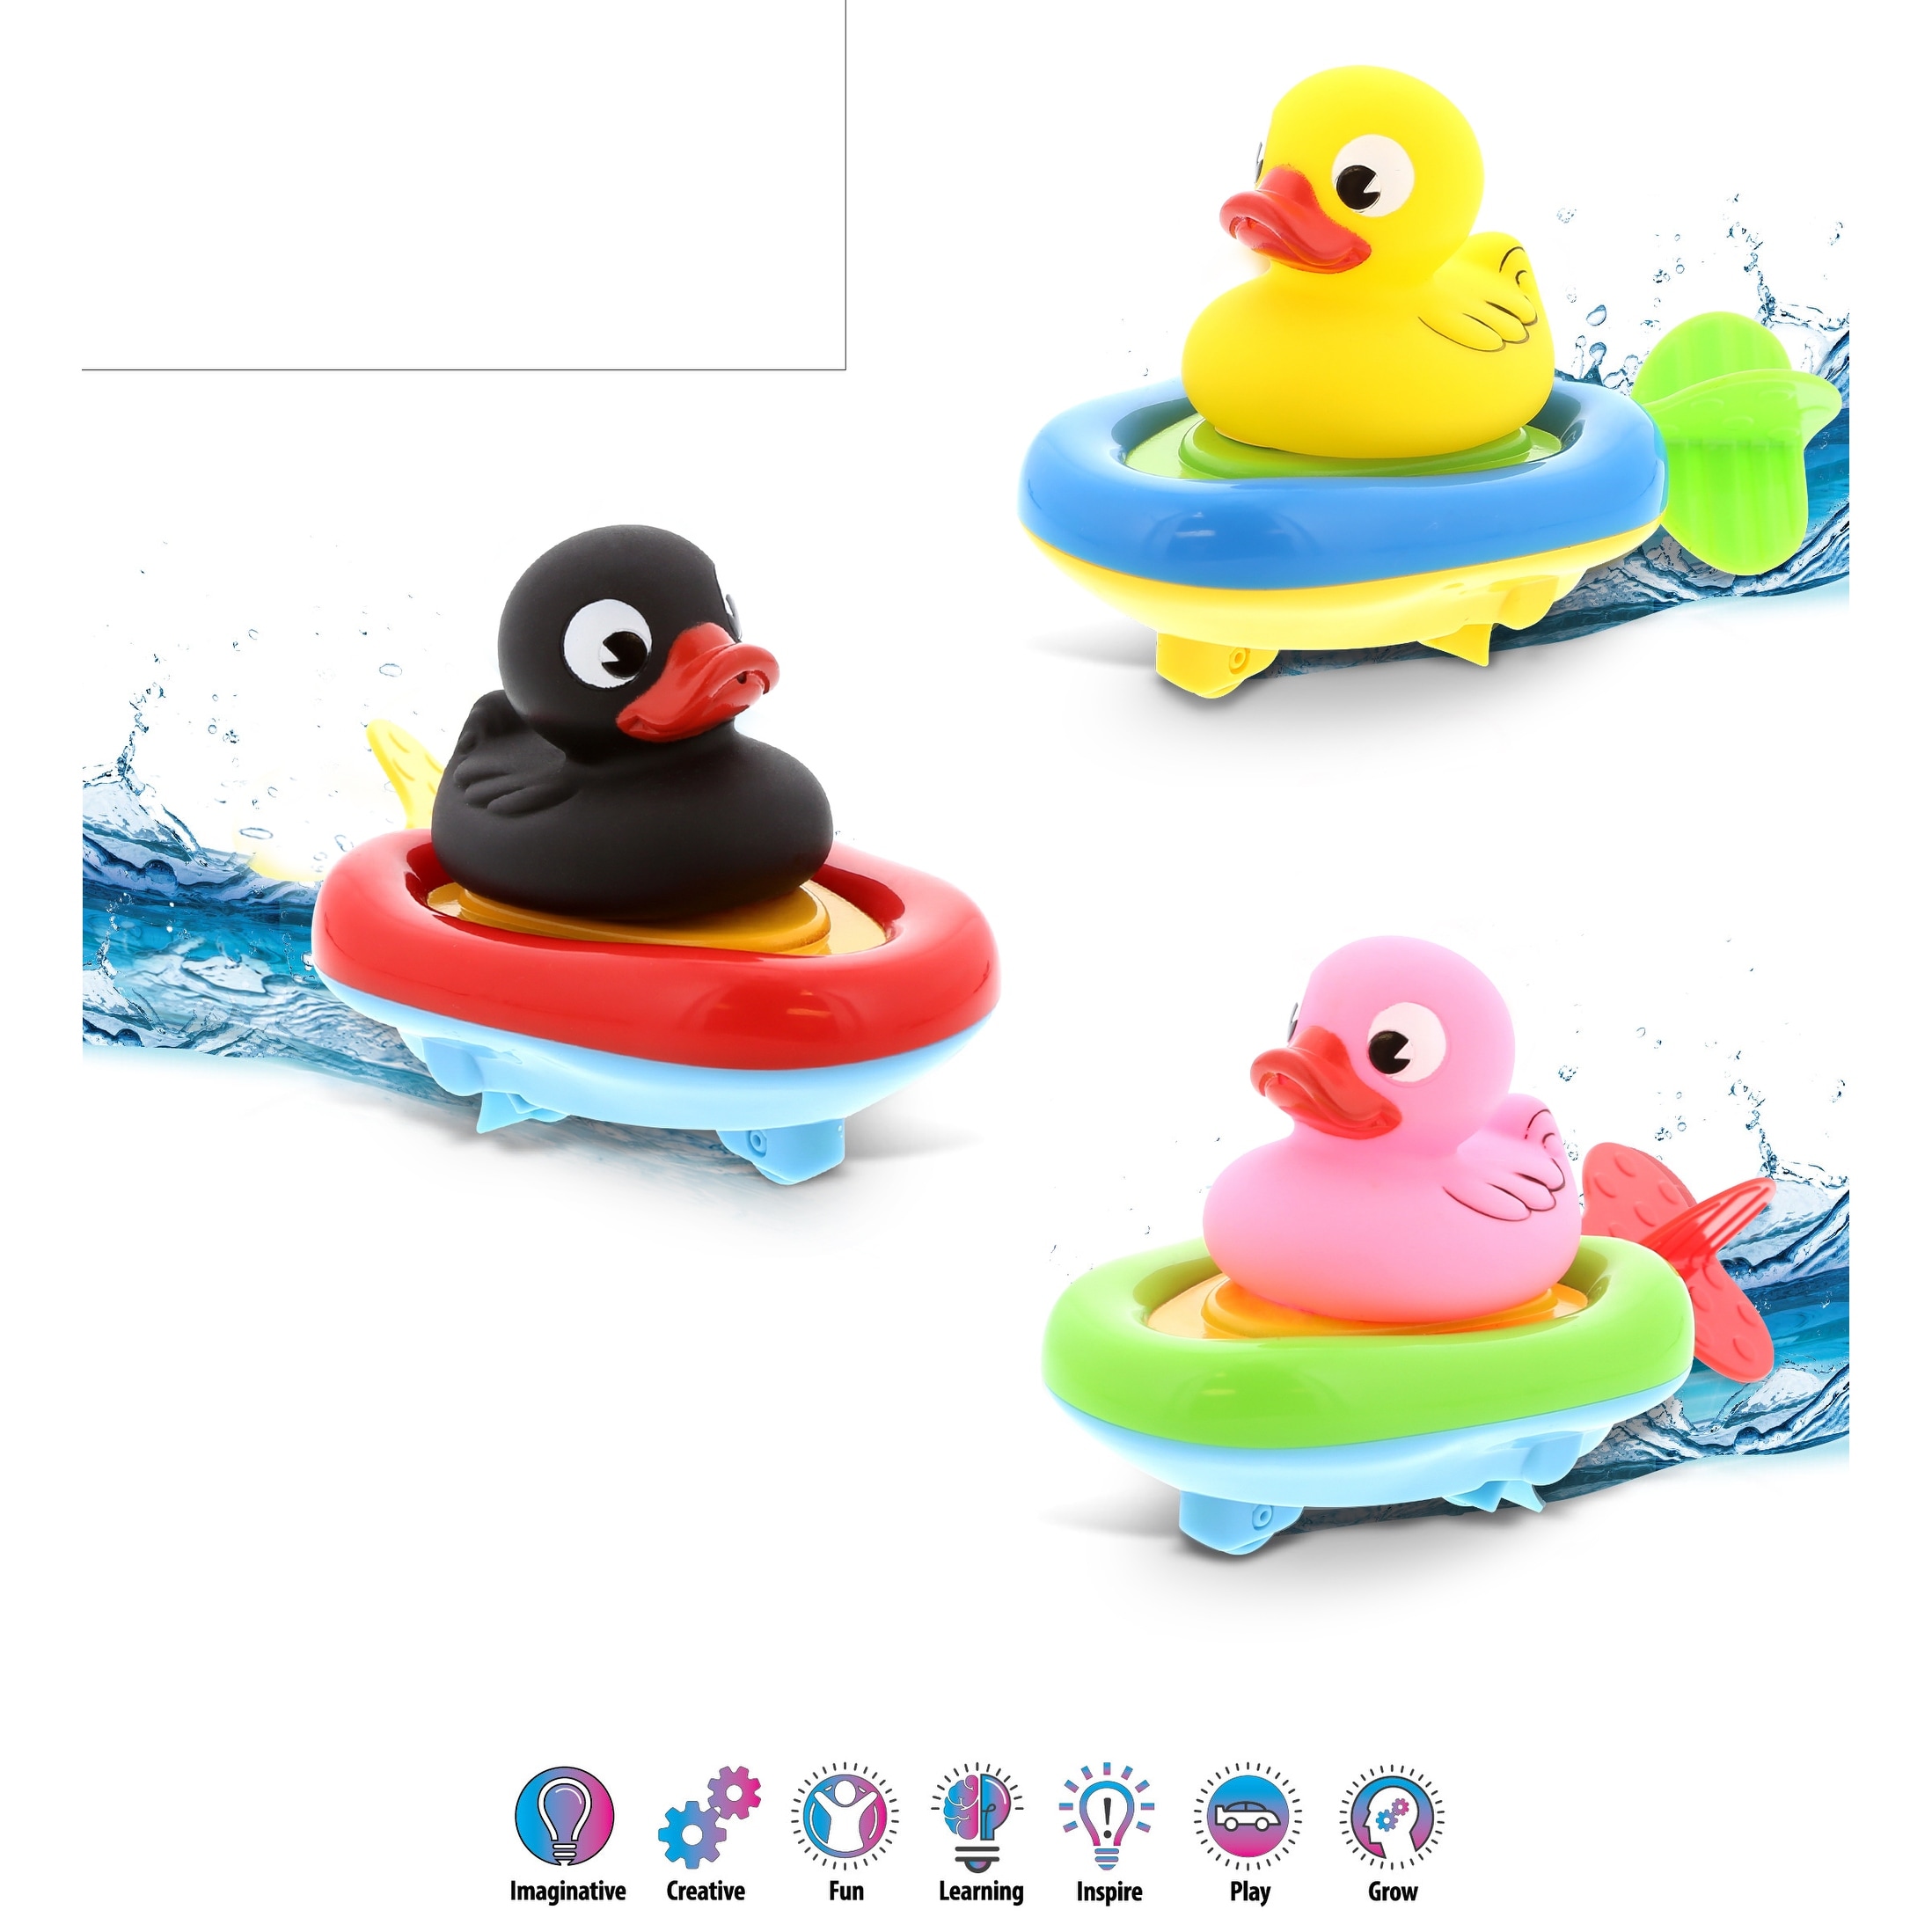 DolliBu Duck Boat Racers Bundle Set of 3 - 3-in-1 Bath Toy Pull & Go - Multicolor - 3x2.25x1.75 inches.